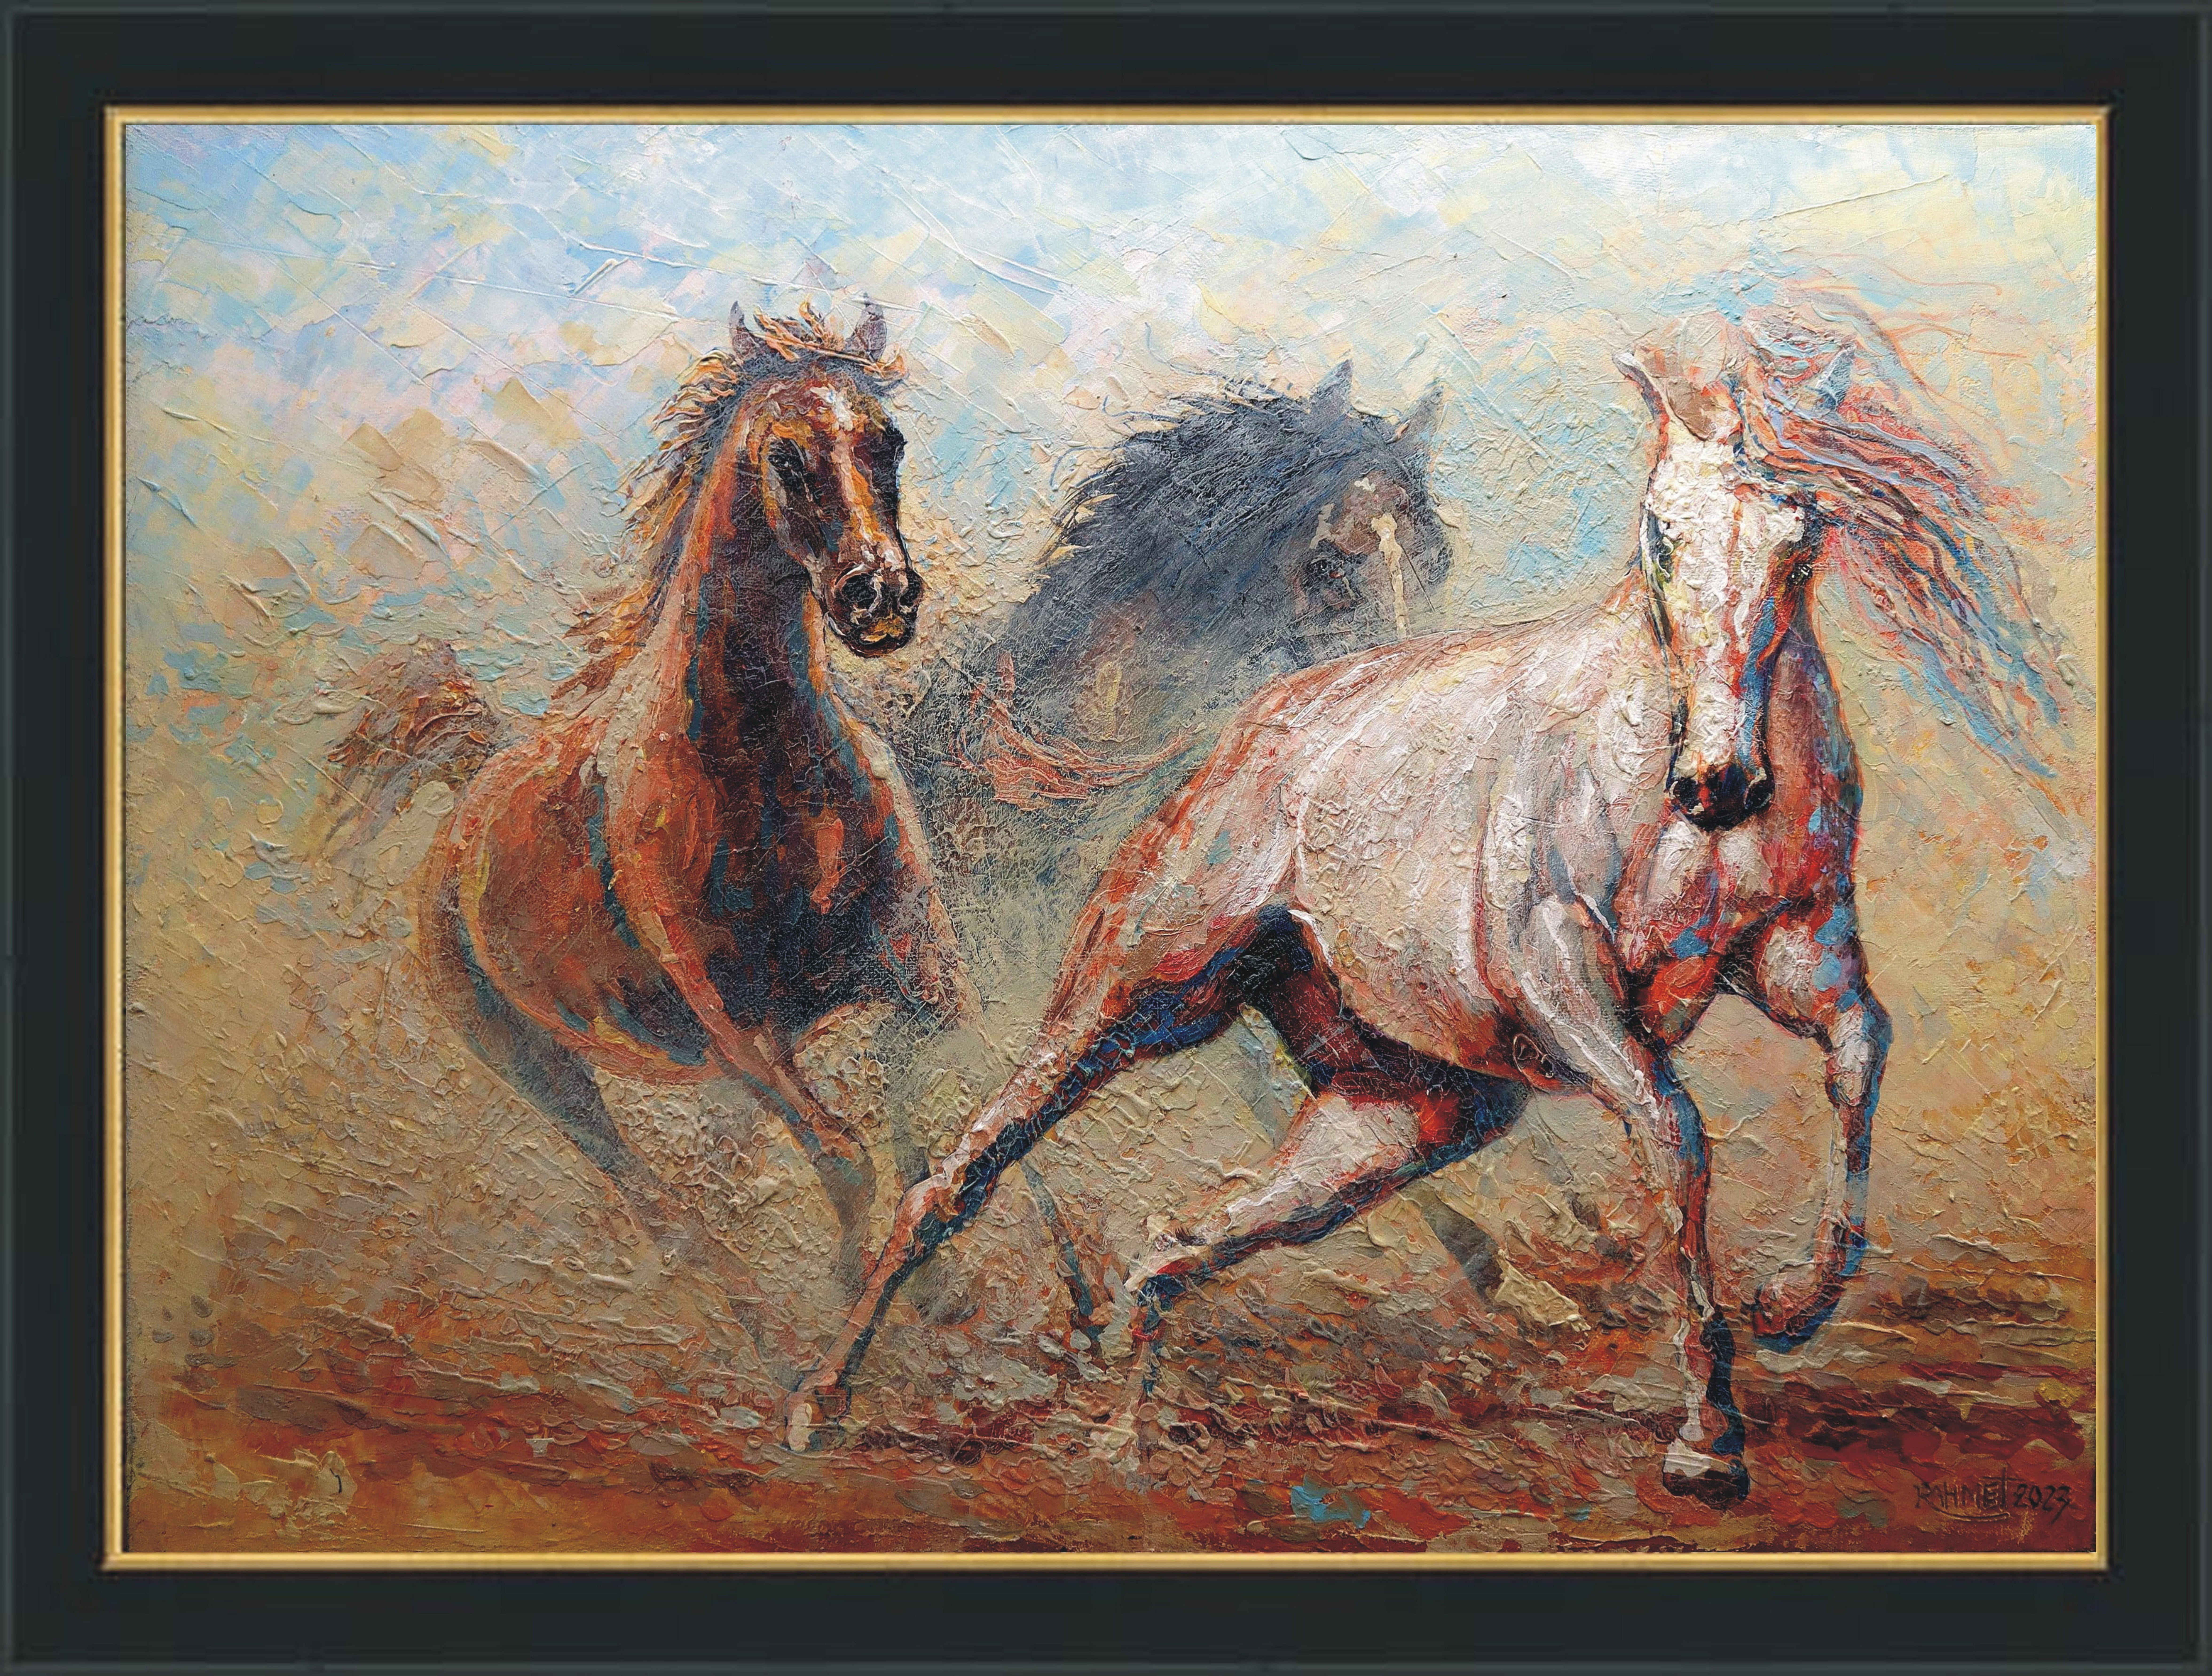 In this spirited painting, I've melded acrylics and oils to capture the essence of unbridled freedom. My brushstrokes, alive with impressionistic vigor, dance alongside the robust realism of these majestic horses. Charged with dynamic movement and